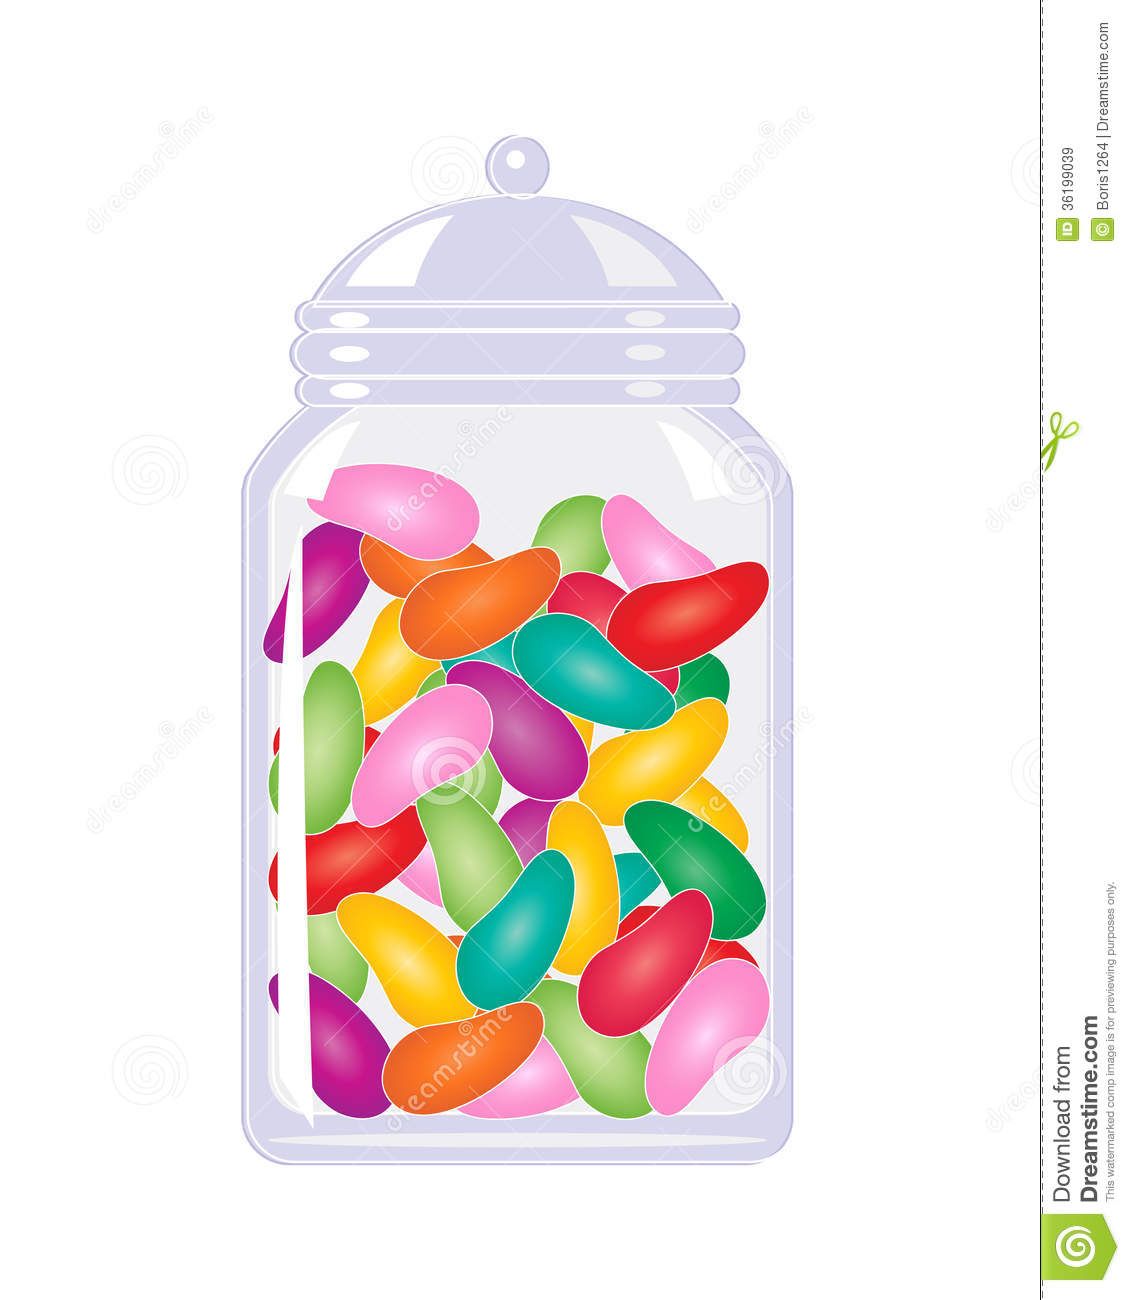 Image Result For Clip Art Jelly Beans - Jelly Bean Jar, Transparent background PNG HD thumbnail